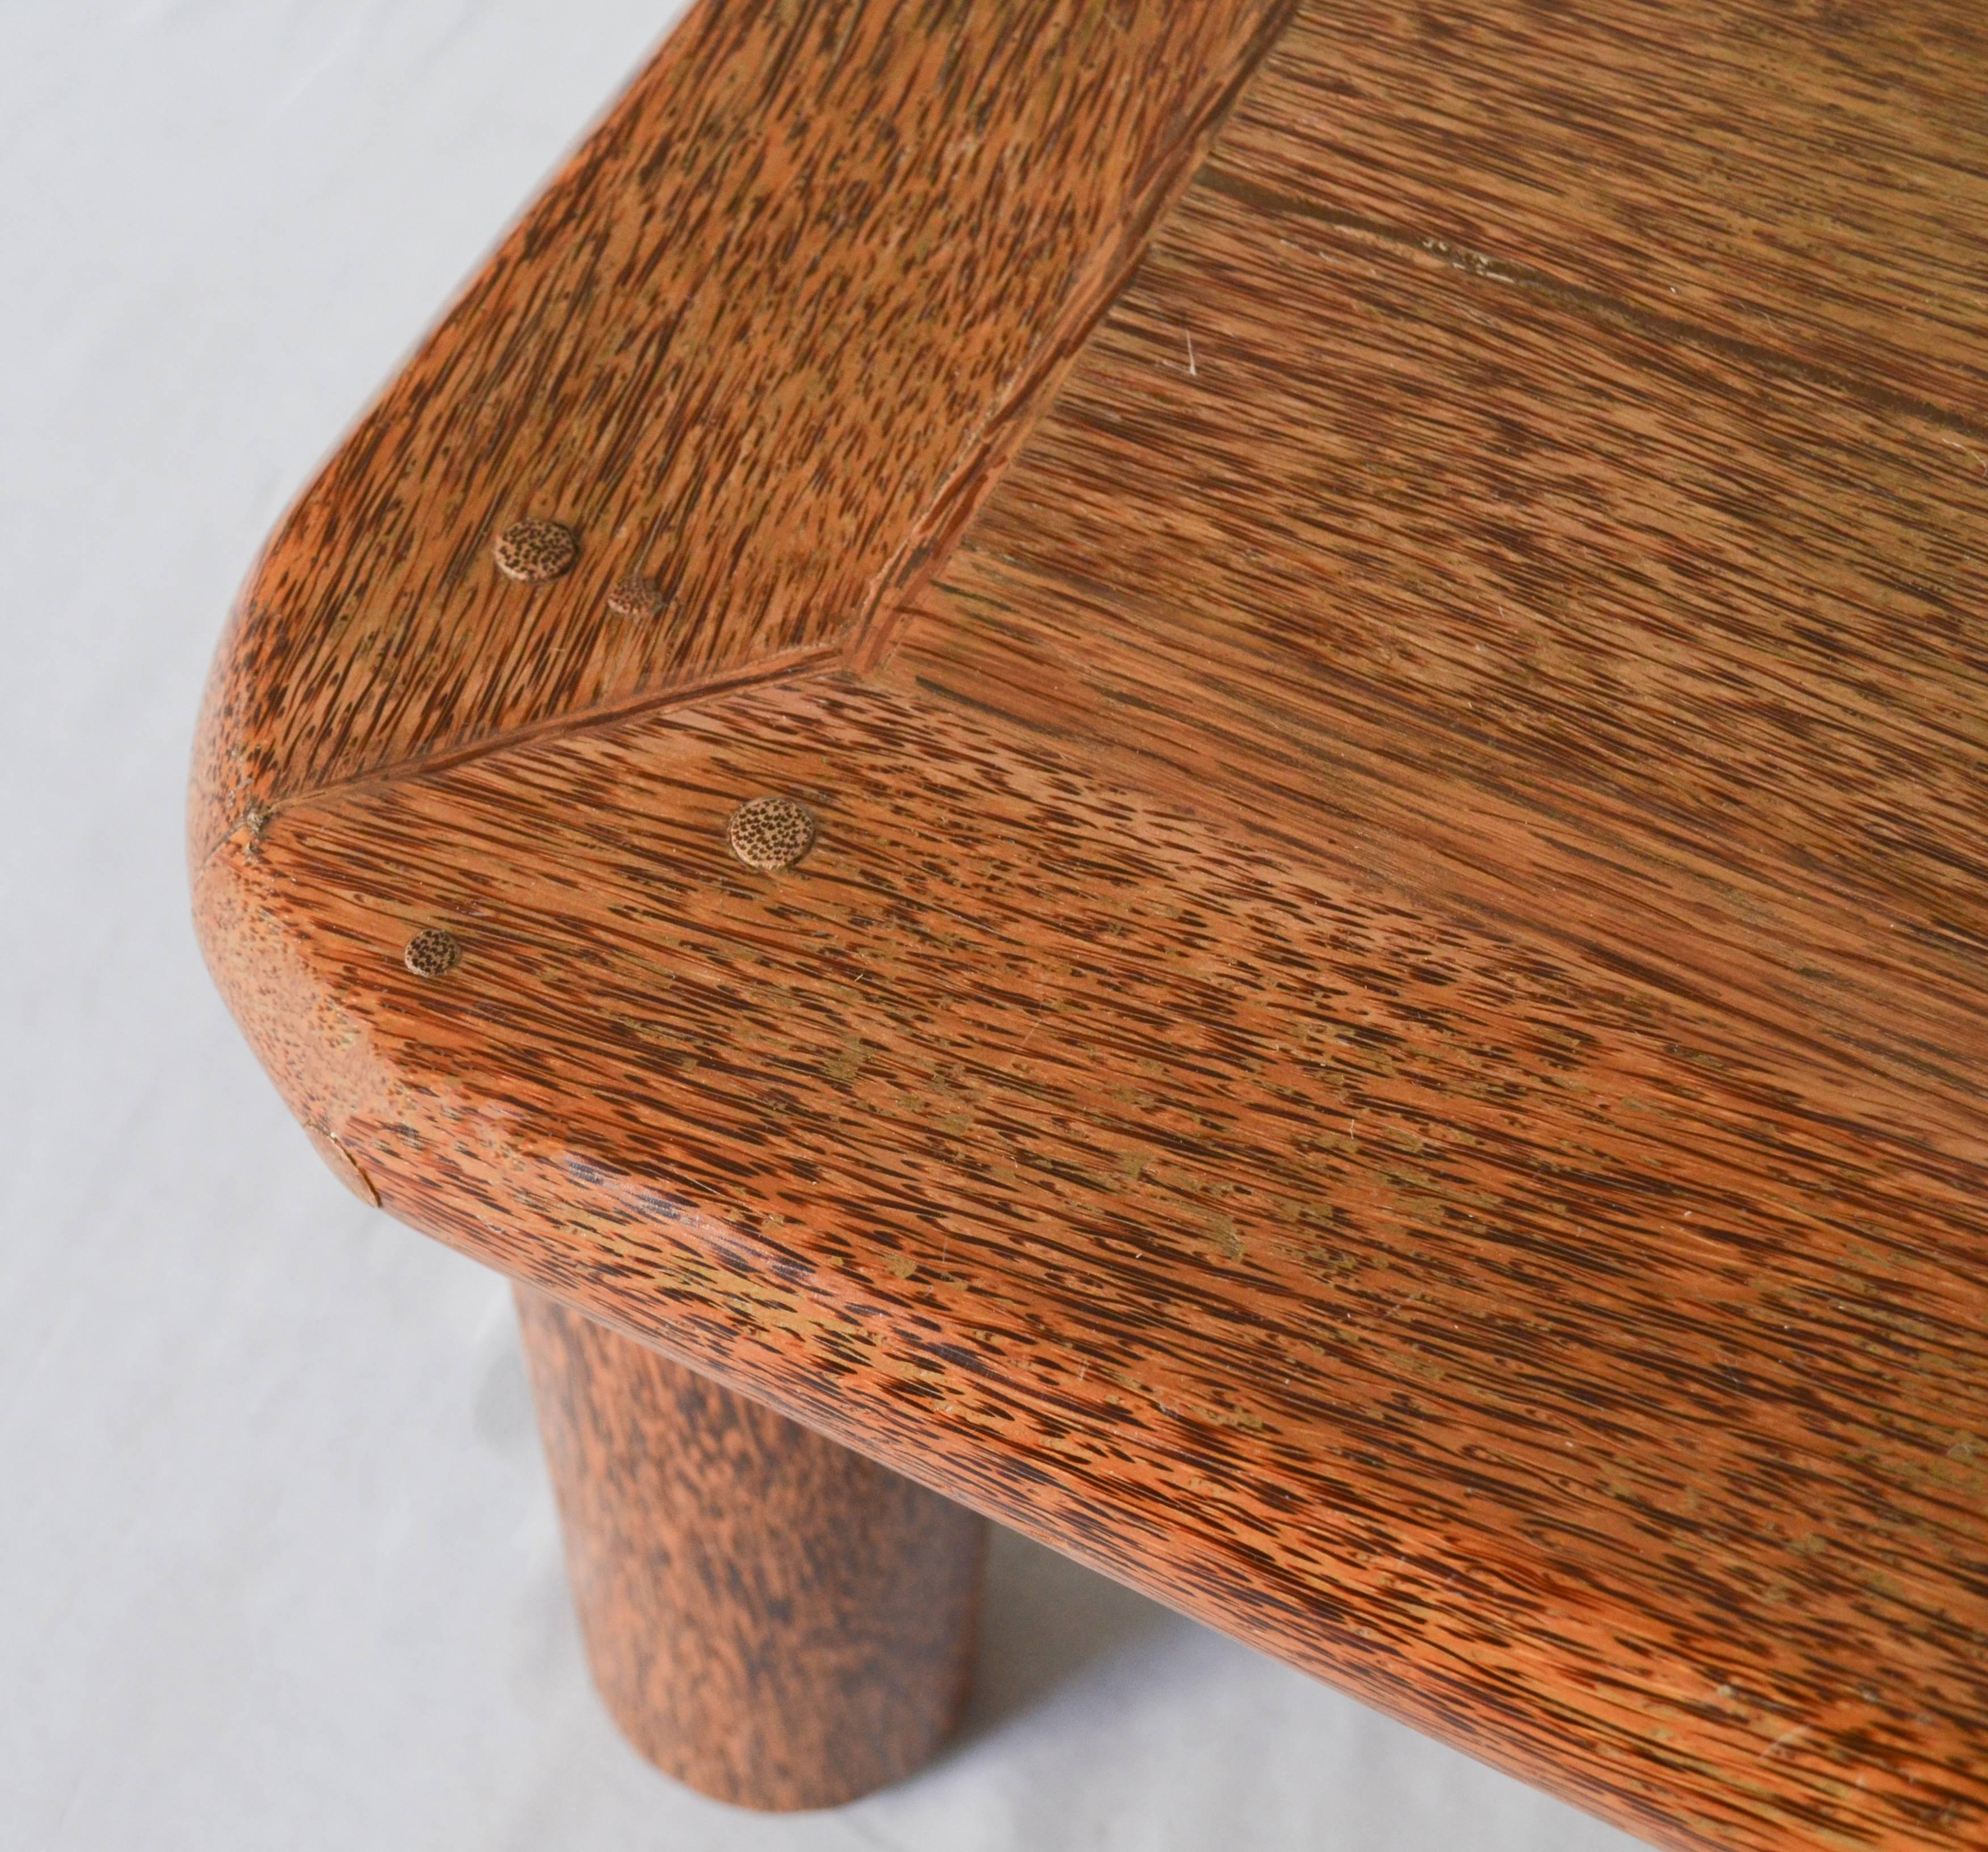 Late 20th Century Pair of Palm Wood Petite Tables by Jacques Grange for Yves Saint Laurent